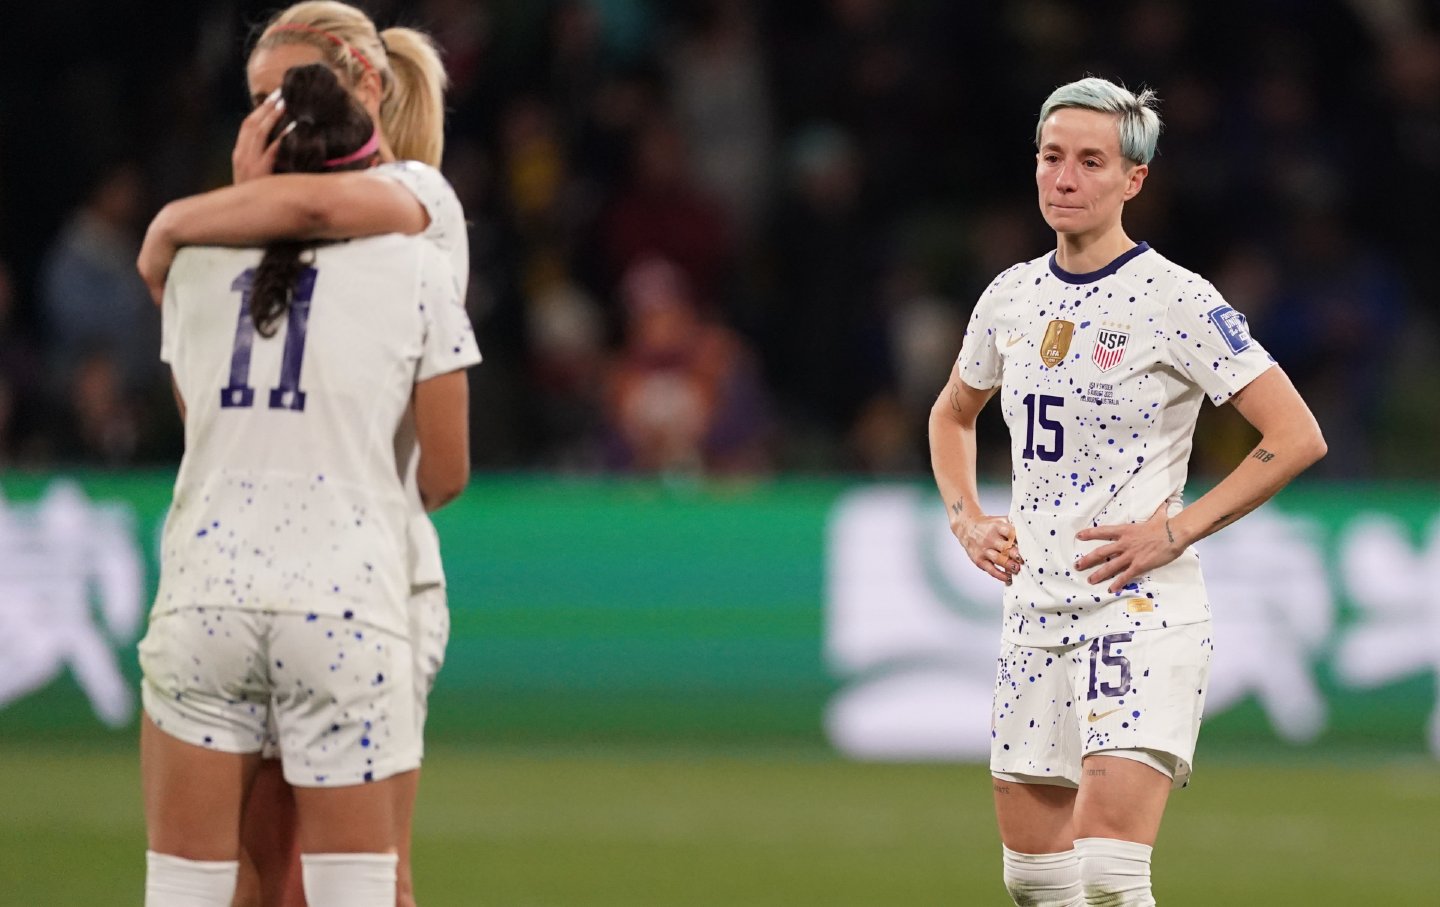 USWNT/ Megan Rapinoe reacts to loss to Sweden on the field after penalty kicks in Women's World Cup match